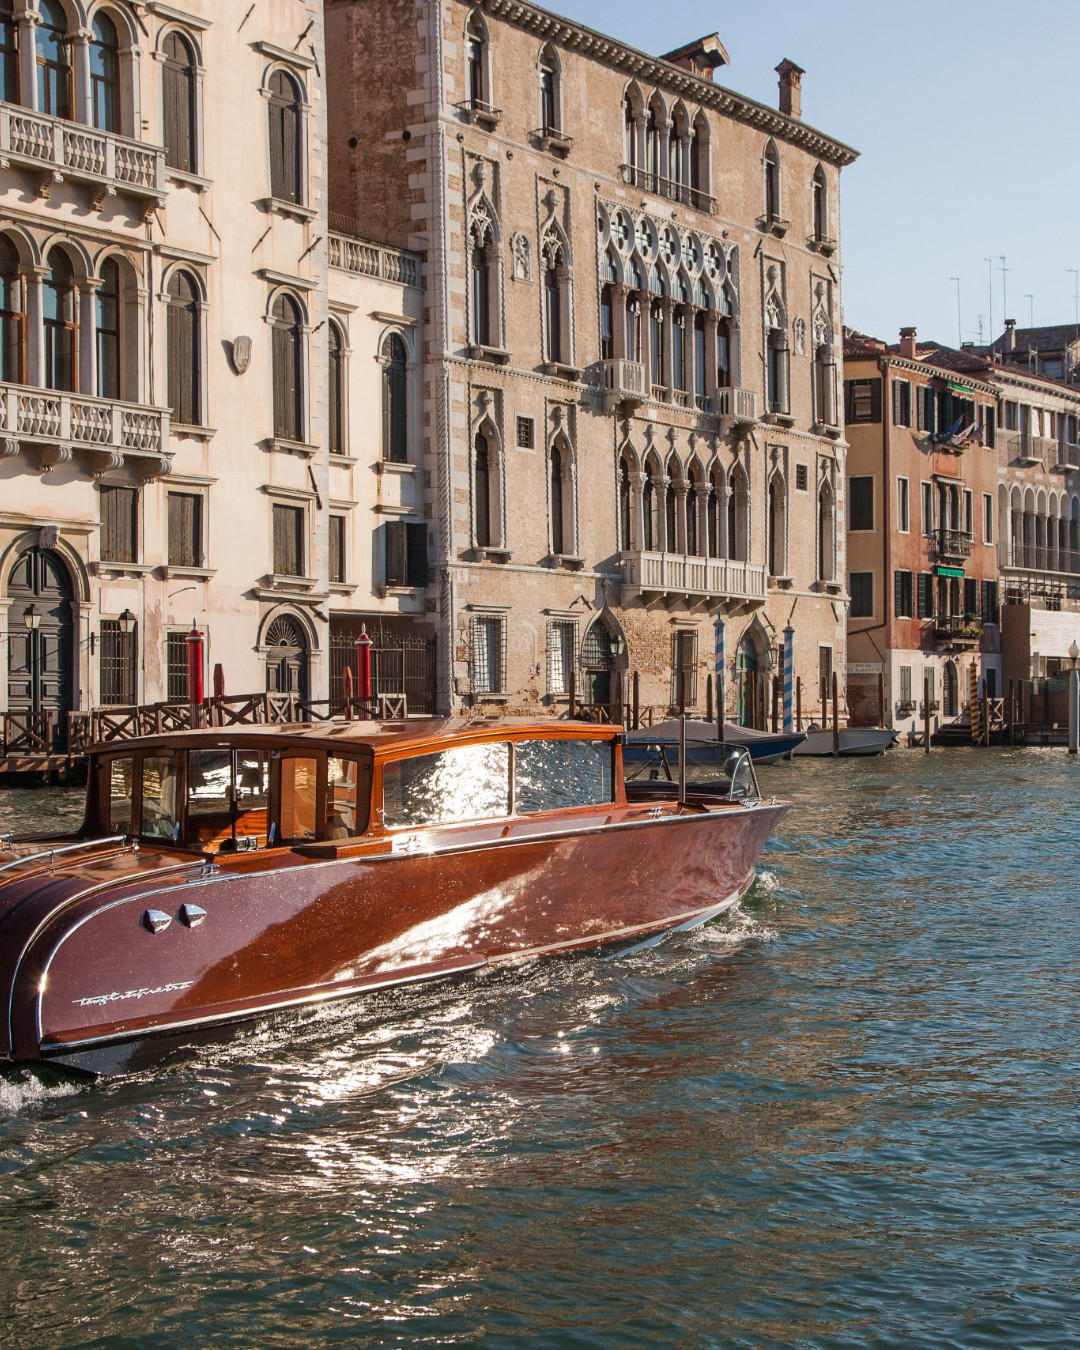 image  1 Aman Venice - The Aman boat glides along the Grand Canal, past historic buildings that have watched